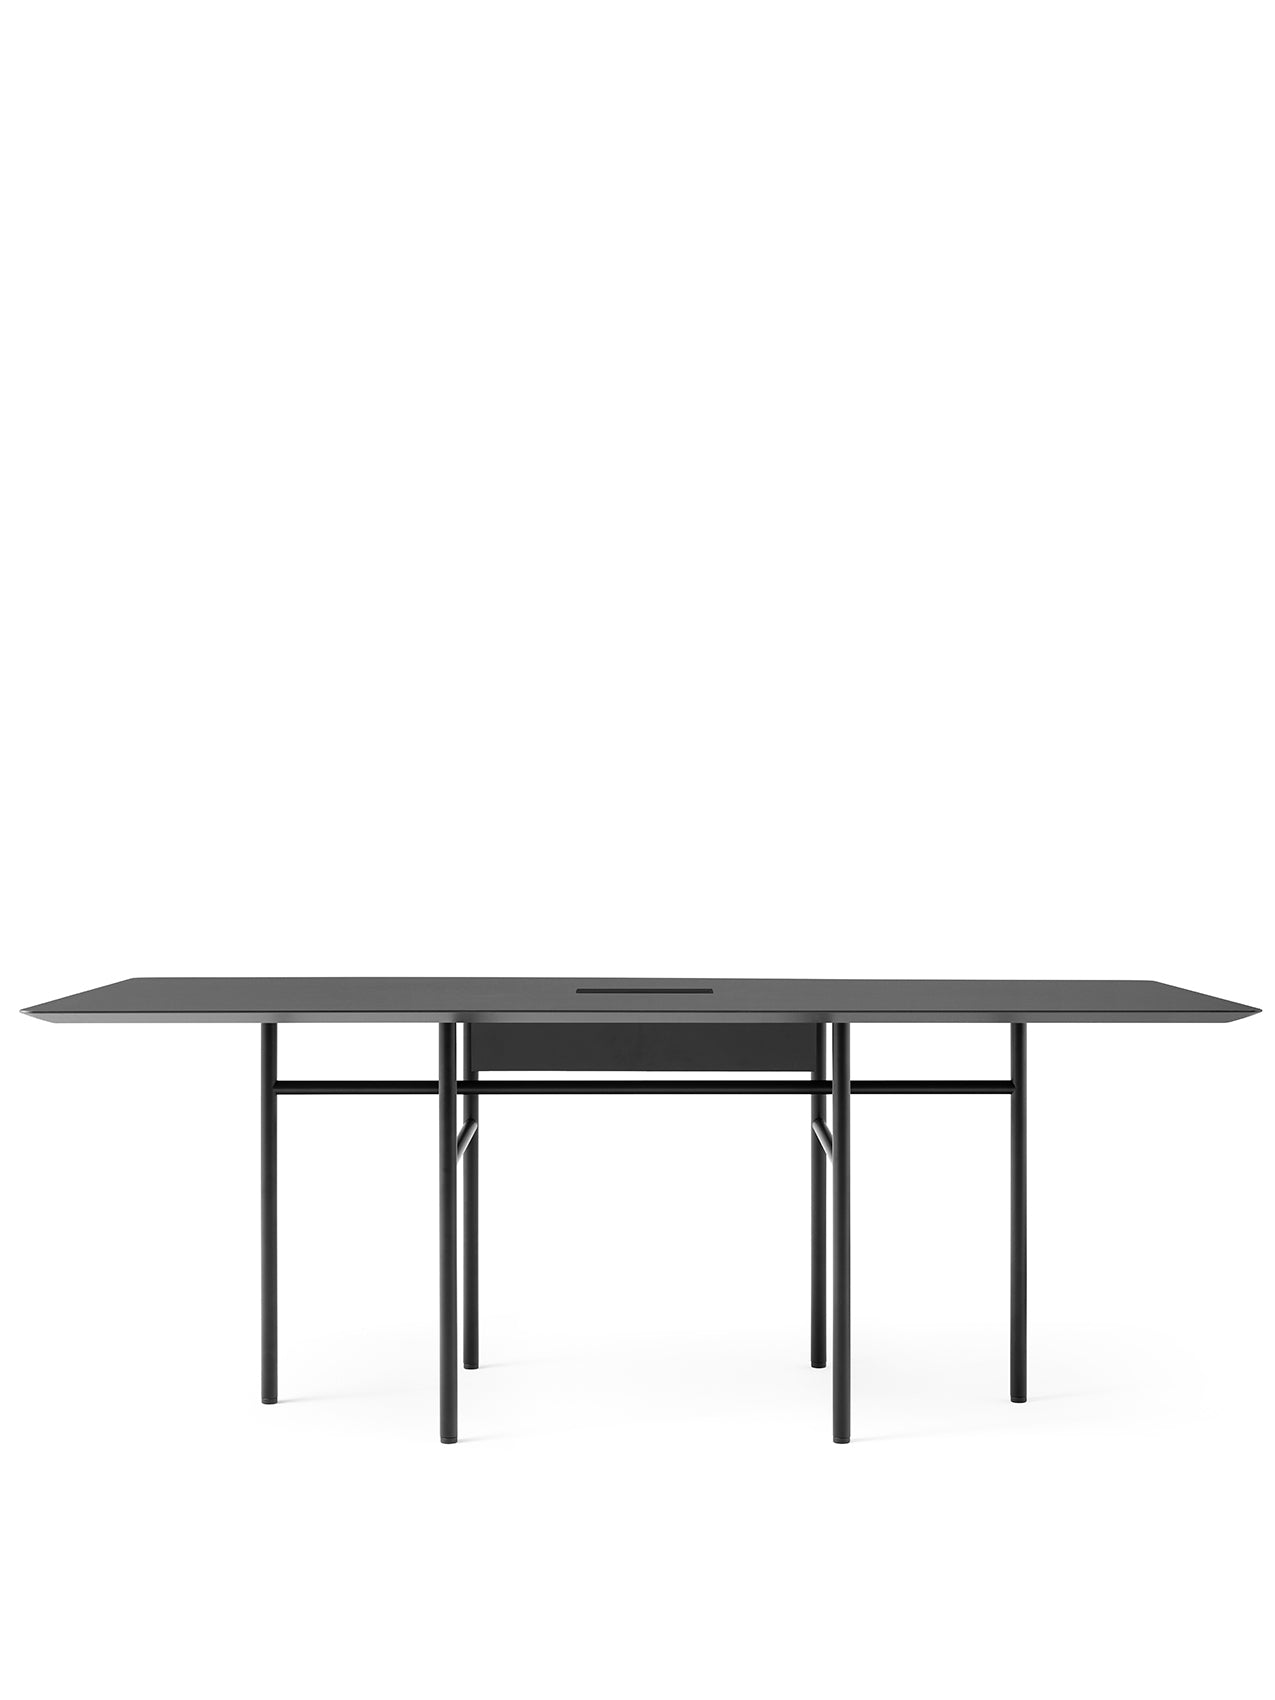 Snaregade Conference Table